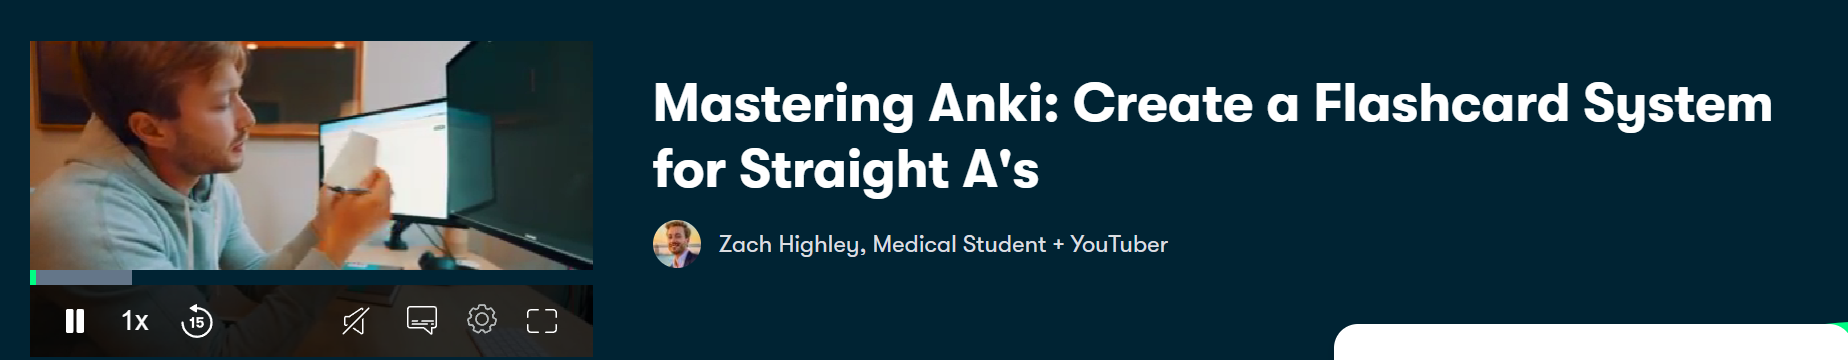 Mastering Anki: Create a Flashcard System for Straight A's